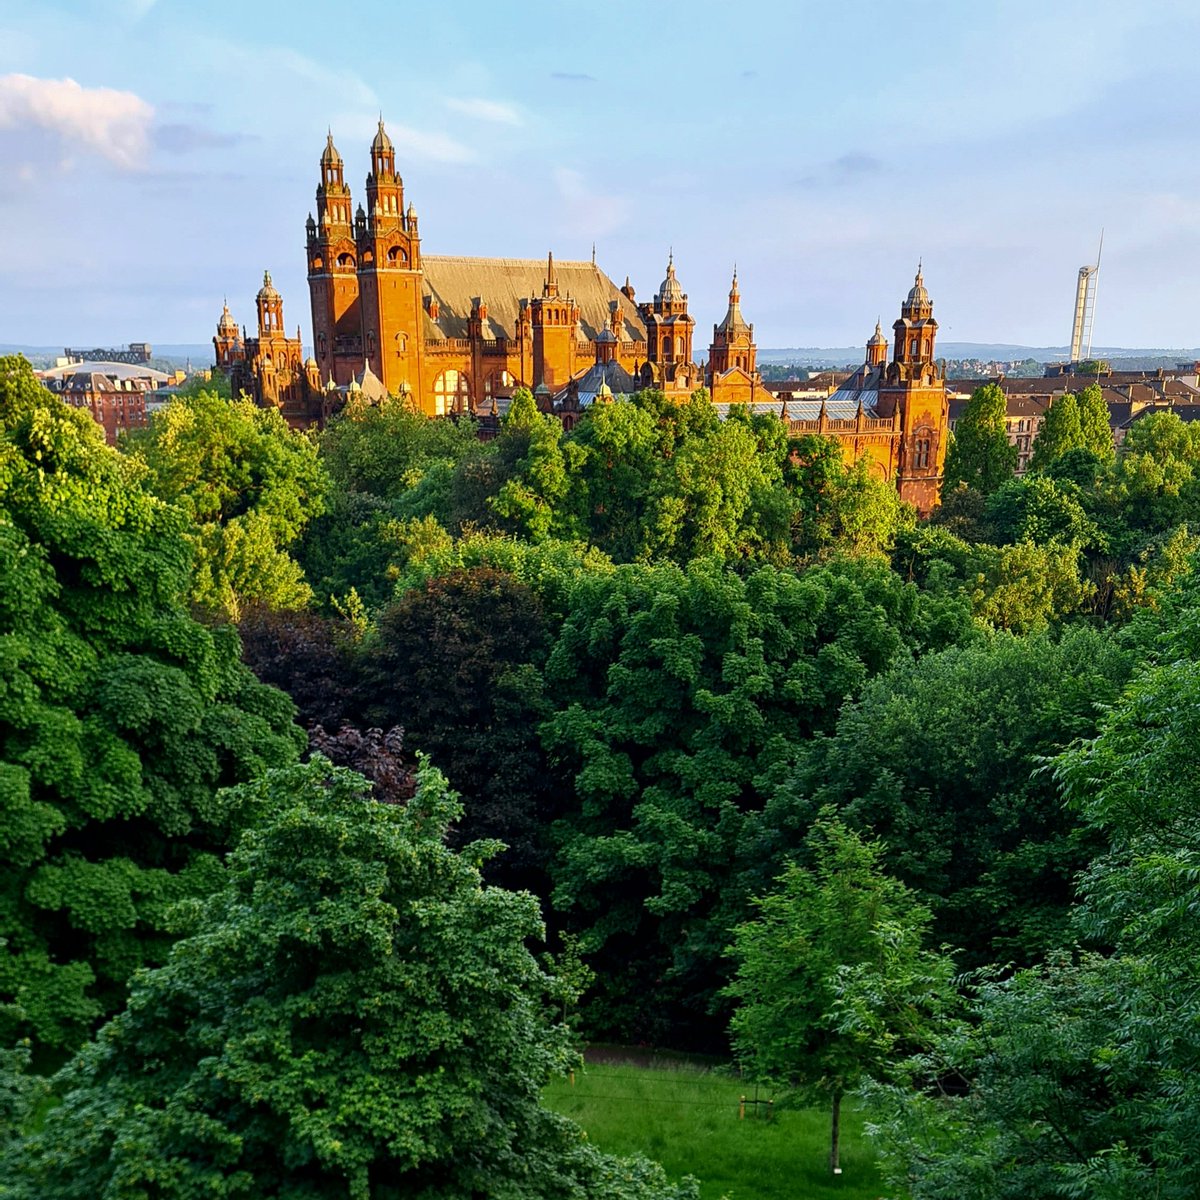 The magnificent Edwardian Baroque Kelvingrove Art Gallery in the West End of Glasgow rising above the greenery of the surrounding park and into the last of this evening's sun. #glasgow #architecture #glasgowbuildings #kelvingrove #kelvingroveartgallery #kelvingrovepark